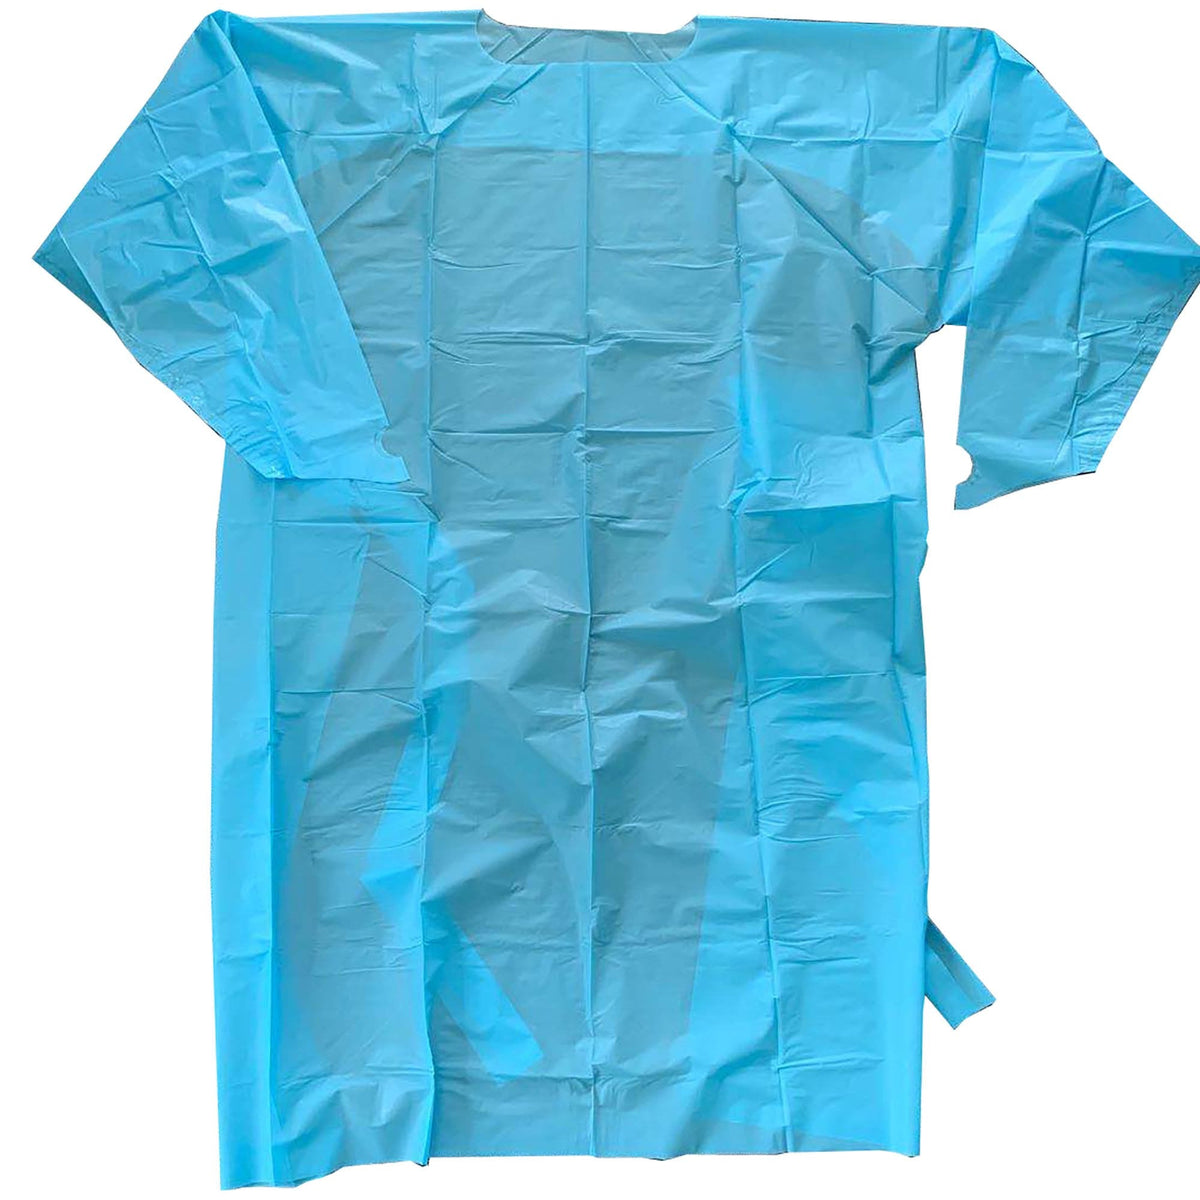 Cypress Over-the-Head Protective Procedure Gown - American Hospital Supply